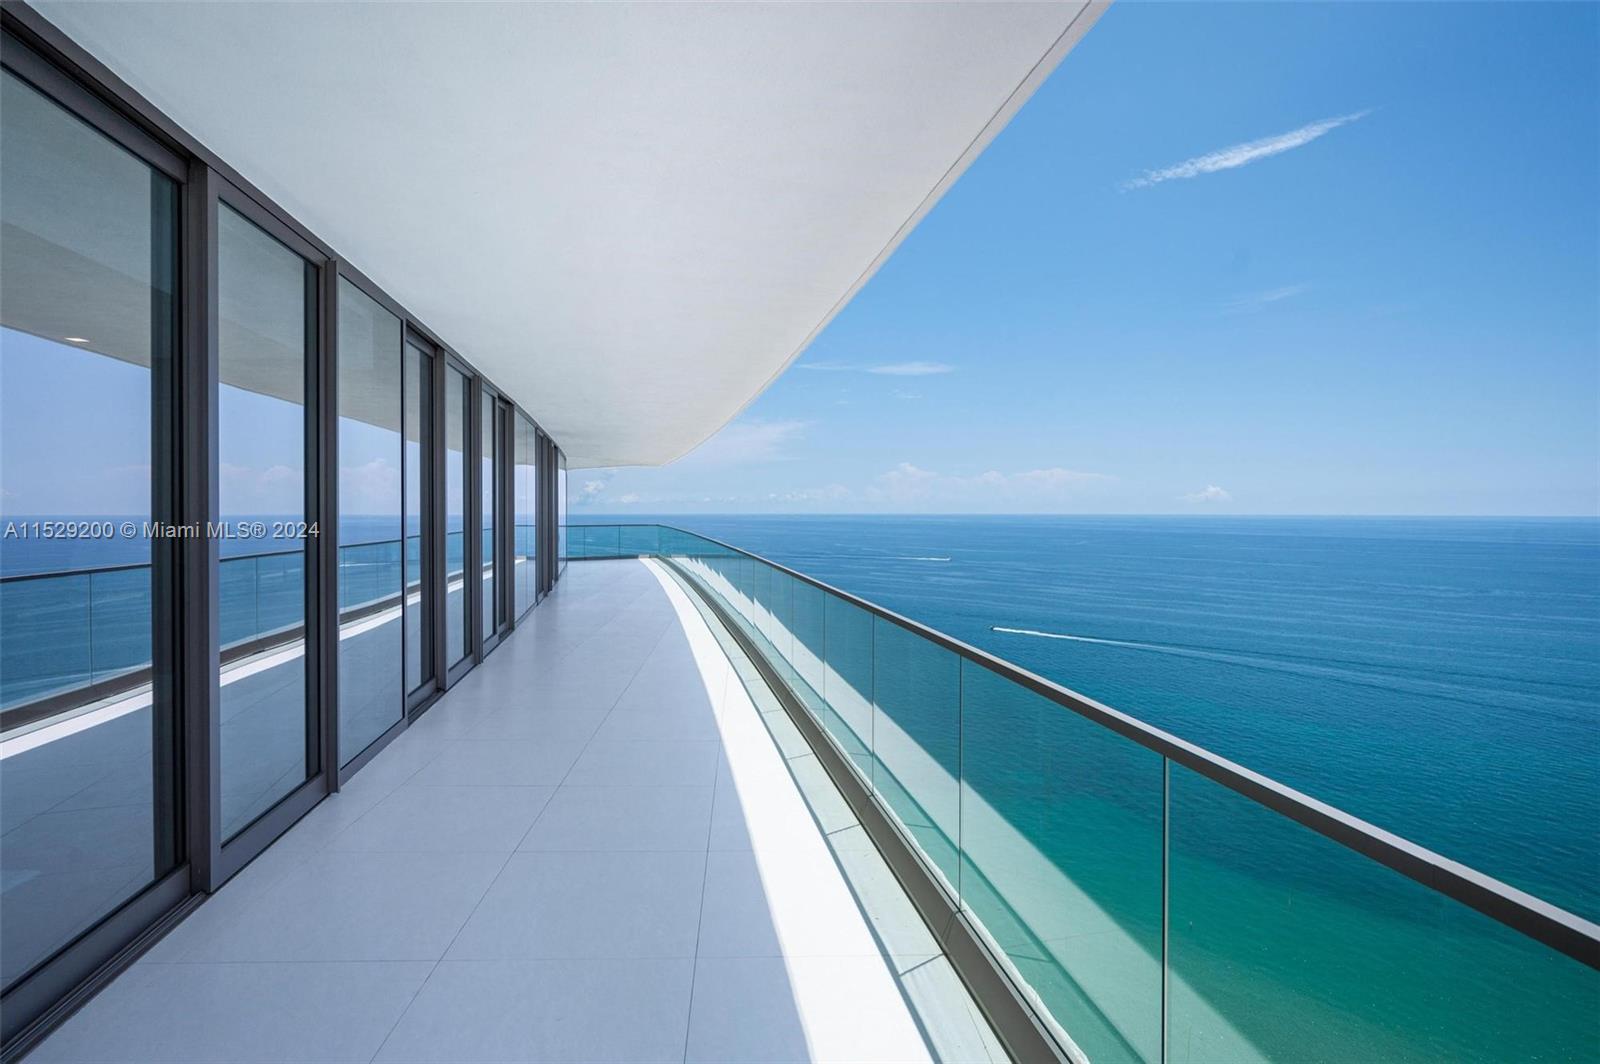 Turnkey 4bed 5 1/2 bath stunning residences bring only your toothbrush, Best line with 150ft terrace with endless ocean& coastline views  North to South, STEP INTO ARMANI, ONE OF A KIND TURNKEY designer residence over $1M of finishes and designer details. Wake up to Sunrise views and wind down with stunning Sunset views, Water views everywhere you look, Over 3800 sq ft plus 1500 sq ft, Immerse yourself into Luxury in this impeccable residences, Comes with option of a cabana located on the Beach Level. The interior boast 10’ft ceilings, bright light throughout , modern Chic beach pad in the sky!! , Includes digital techknowledgy, Armani offers full service, Beach Club & Restaurant Room service, State of the art Gym, Full-service spa,Movie Theatre, Wine Room, Game room and more, Must see